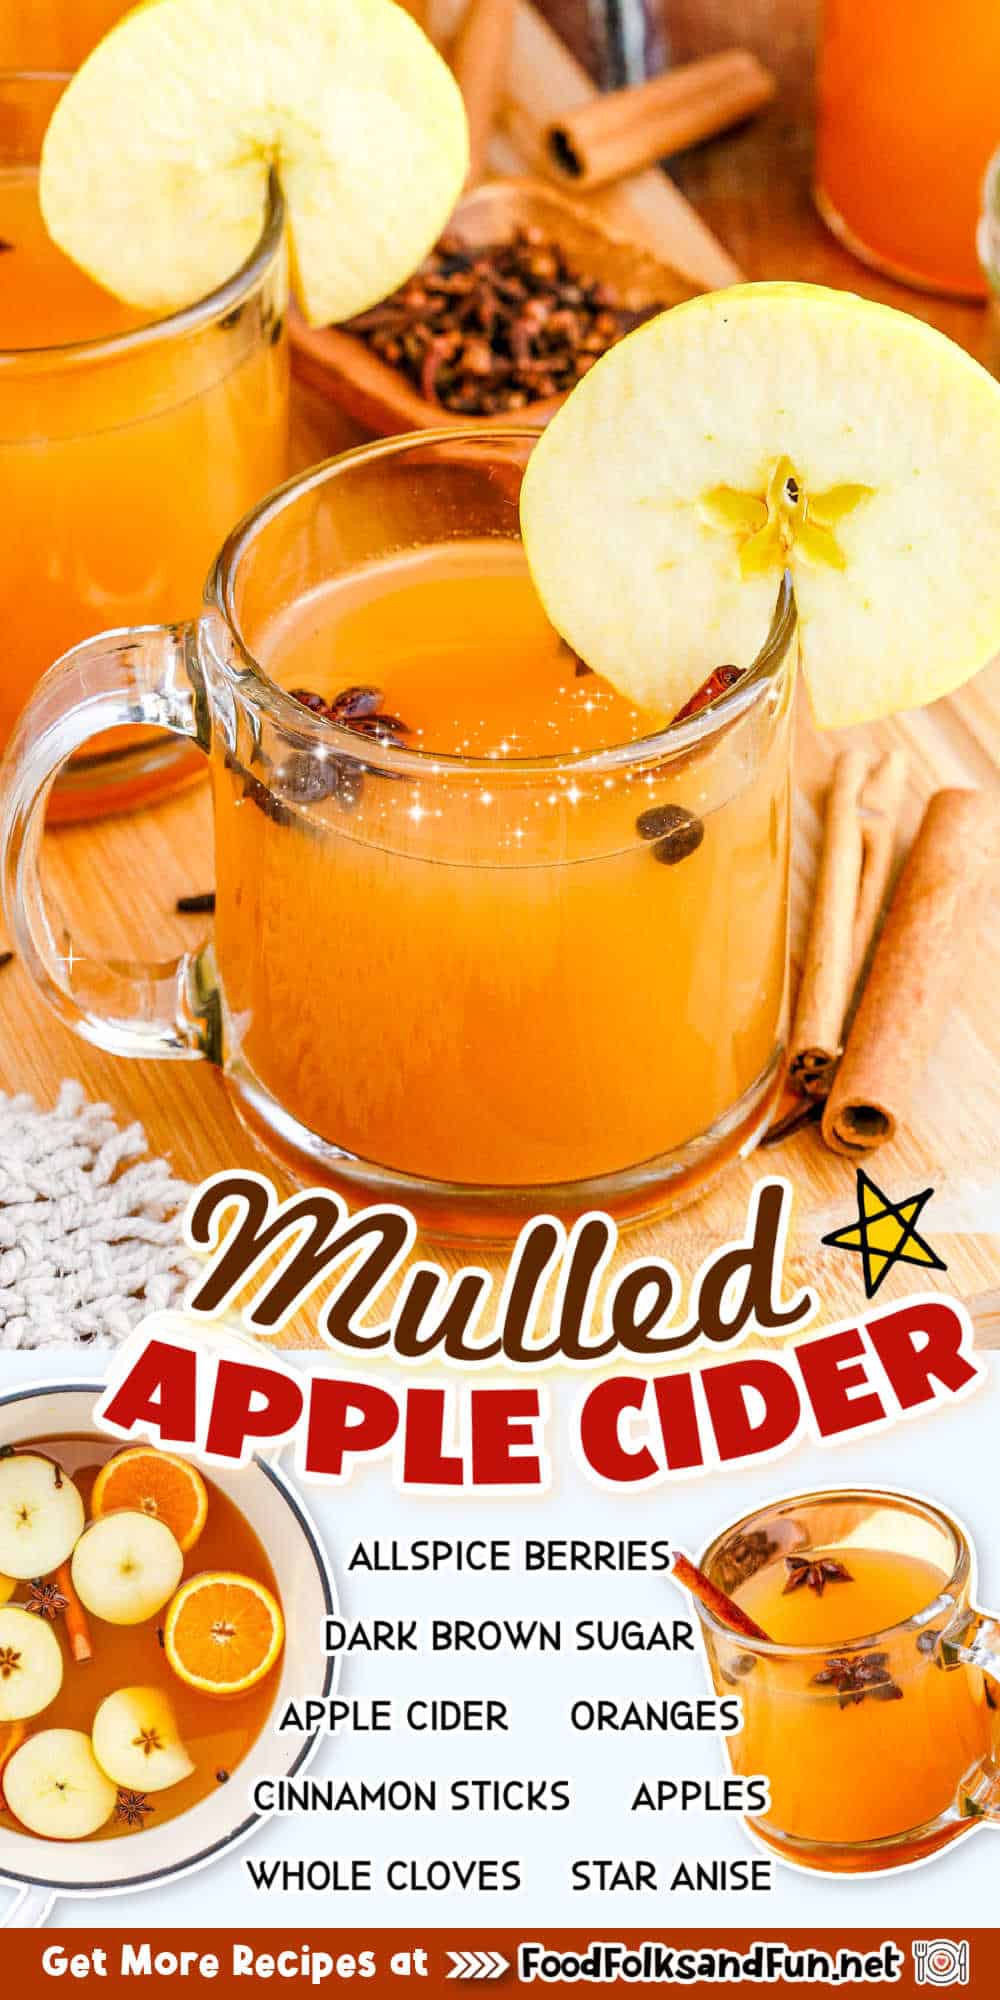 Mulled Apple Cider is a cozy of citrus flavor, tart apple, and infused Fall spices. It's perfect for a cool autumn day or holiday entertaining. via @foodfolksandfun